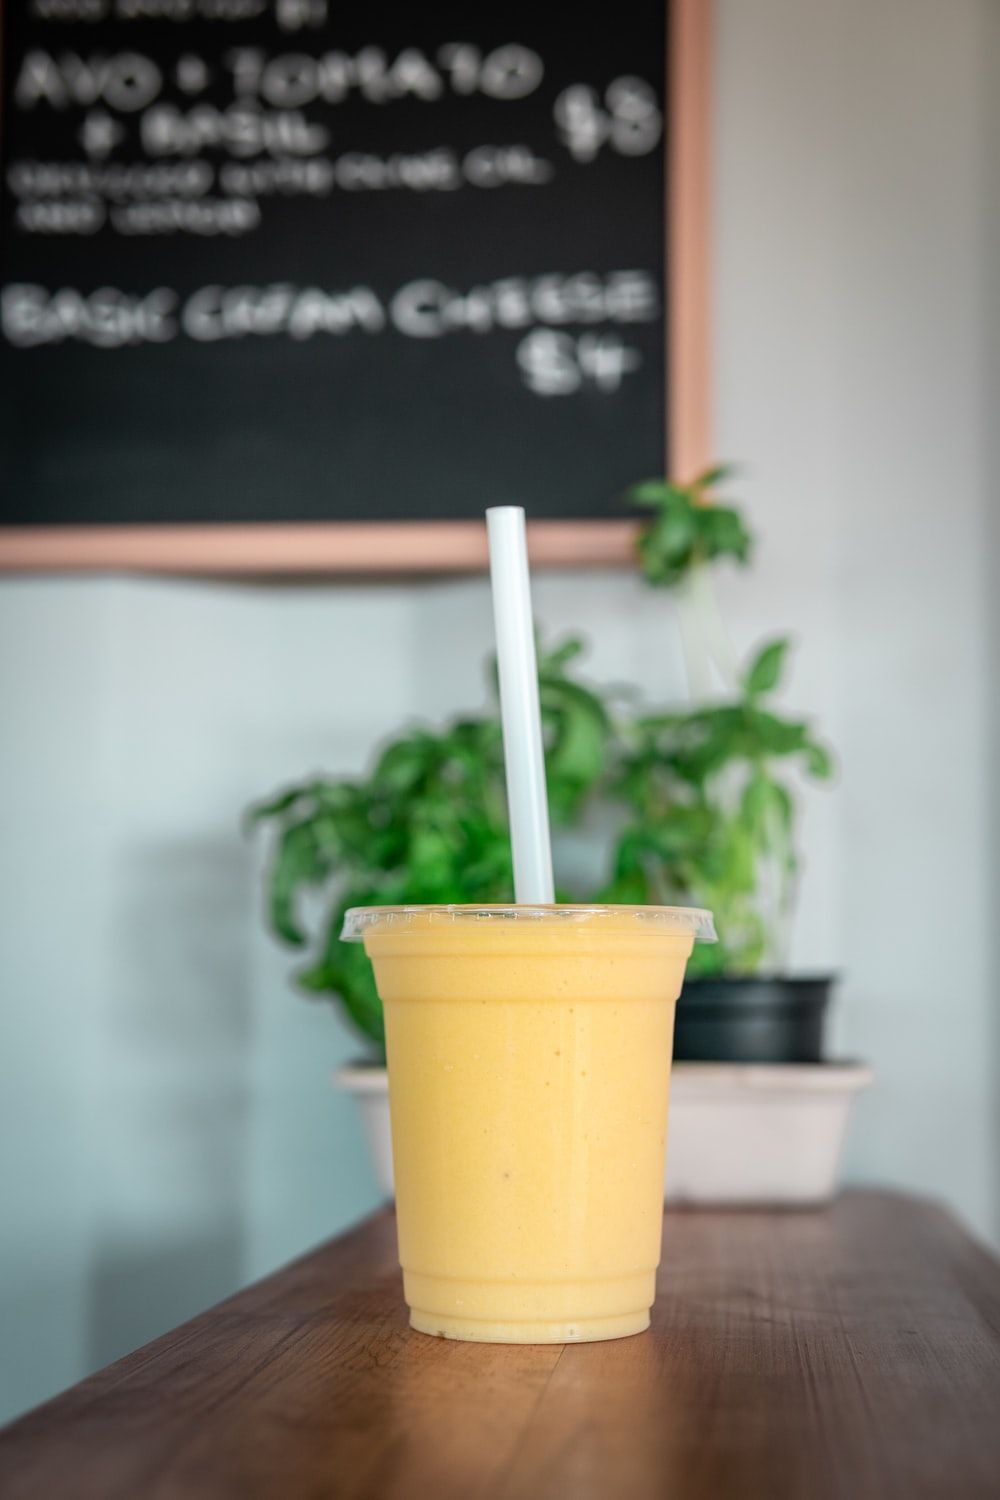 Mango Smoothie Picture. Download Free Image